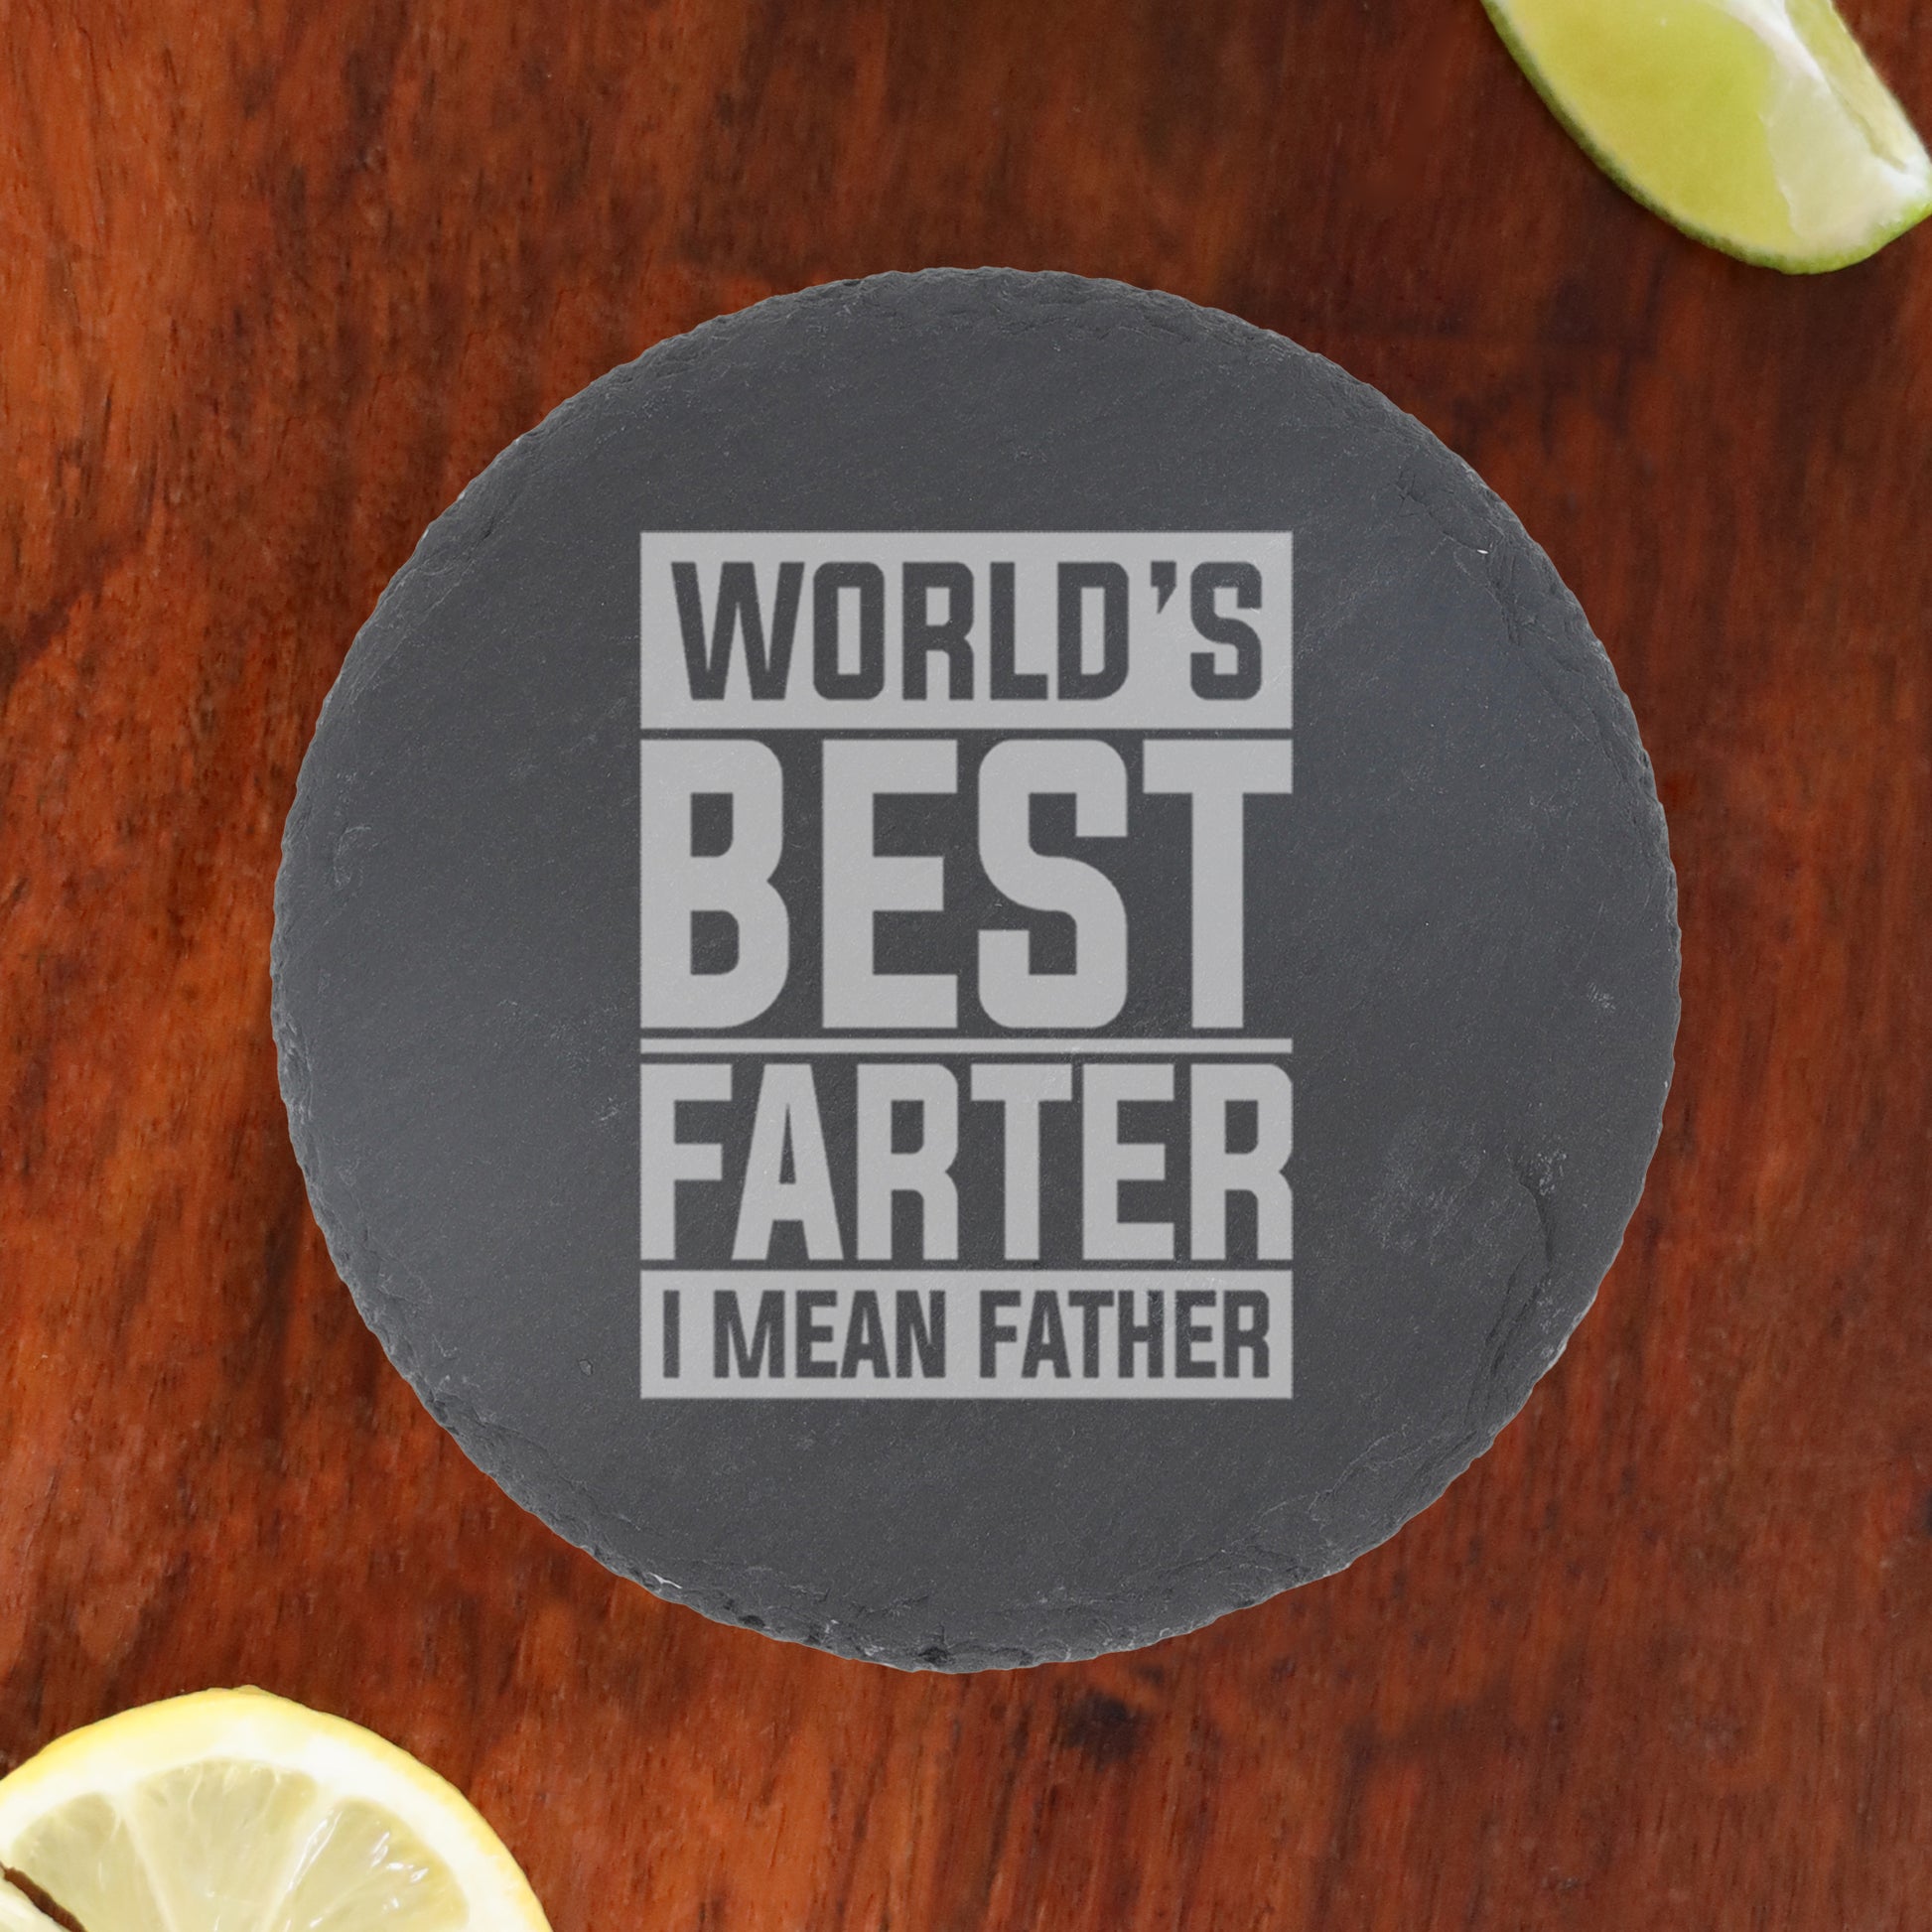 "Worlds Best Farter I Mean Father" Novelty Engraved Wine Glass and/or Coaster Set  - Always Looking Good - Round Coaster Only Square Design 